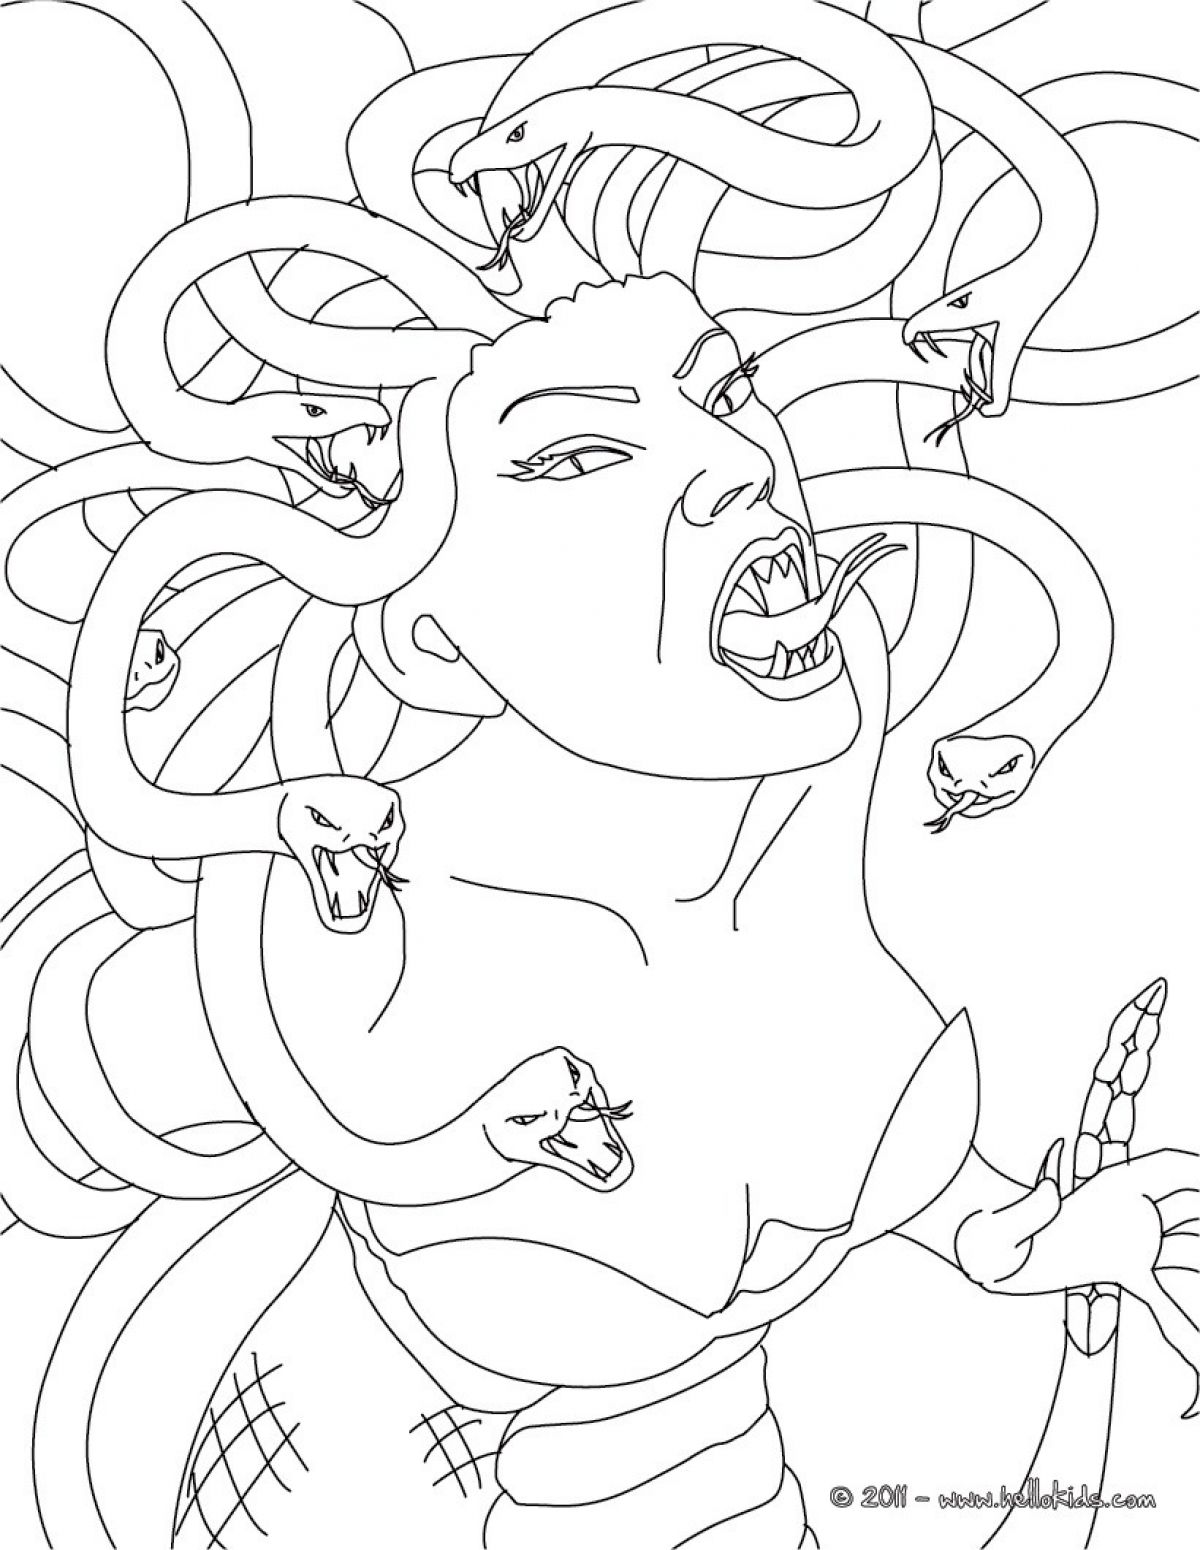 Greek mythology coloring pages to download and print for free